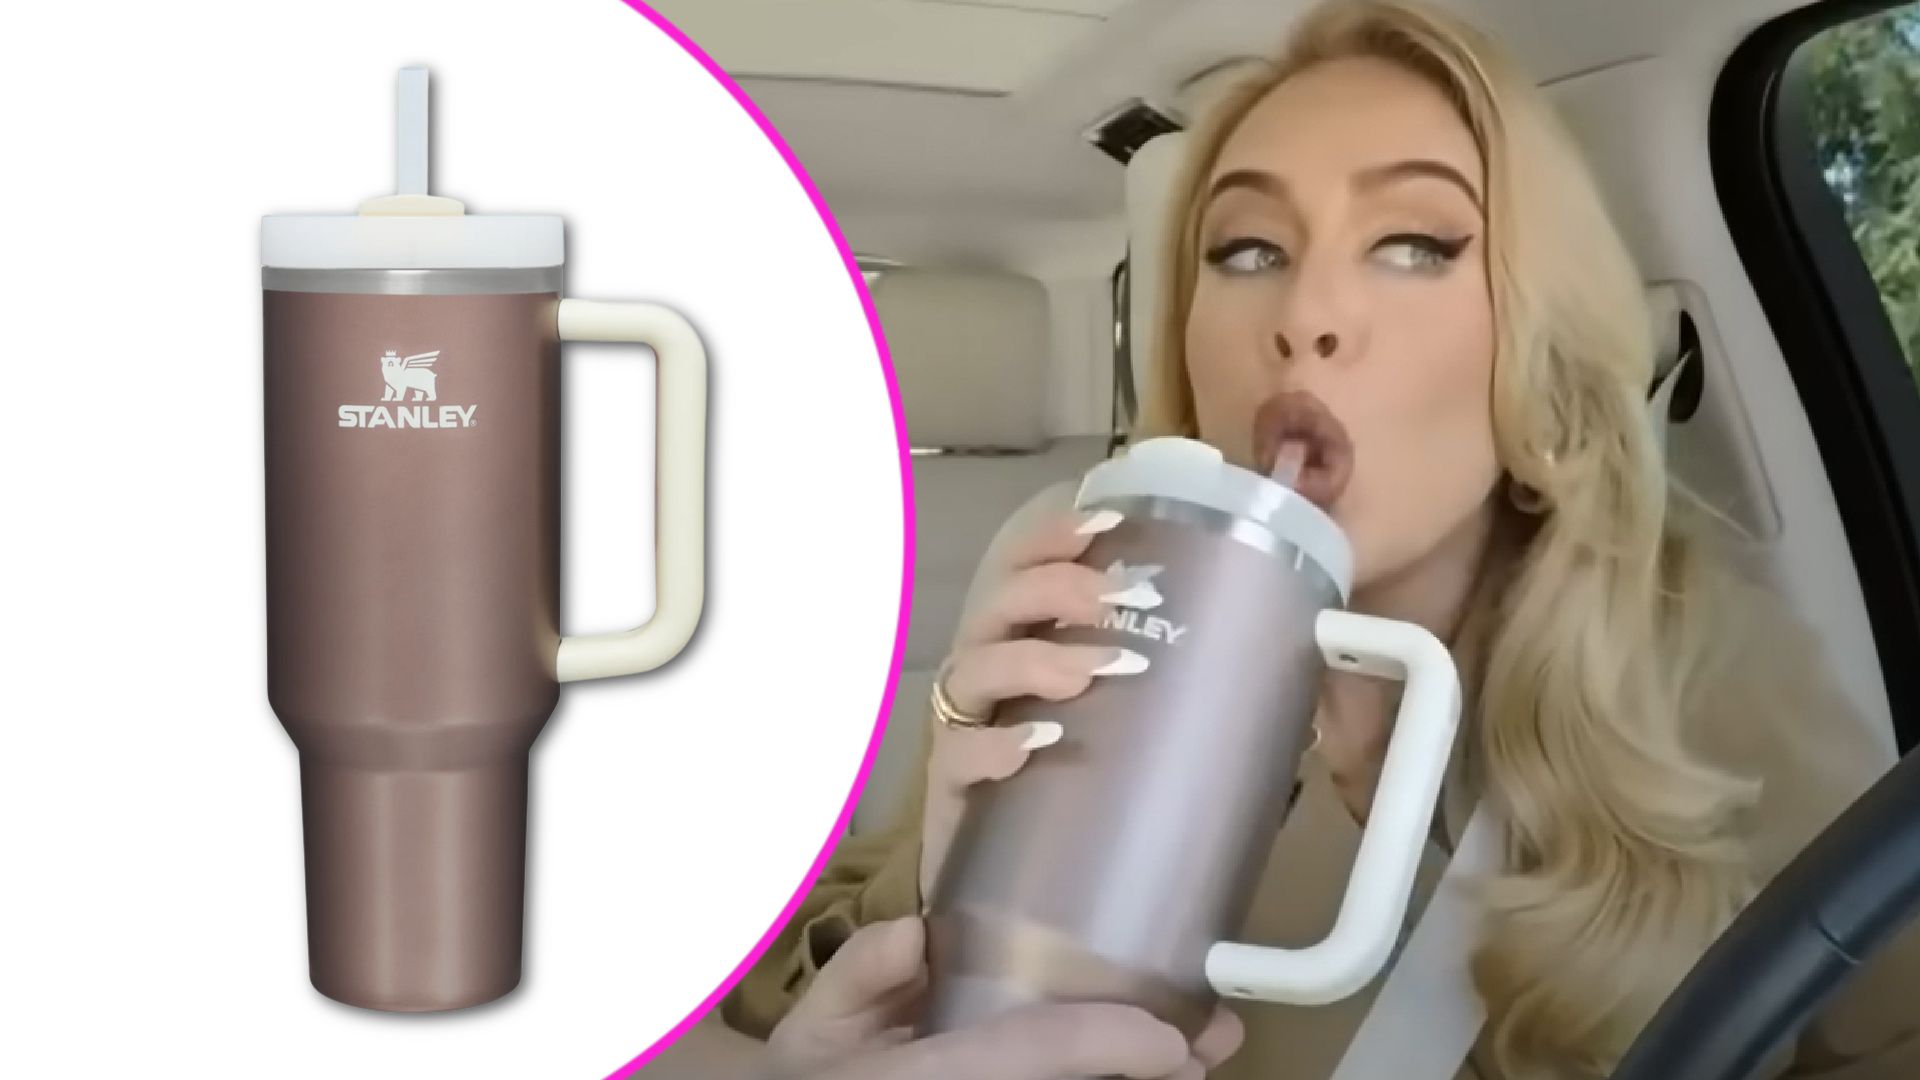 The TikTok-viral Stanley Quencher tumbler is available in a new